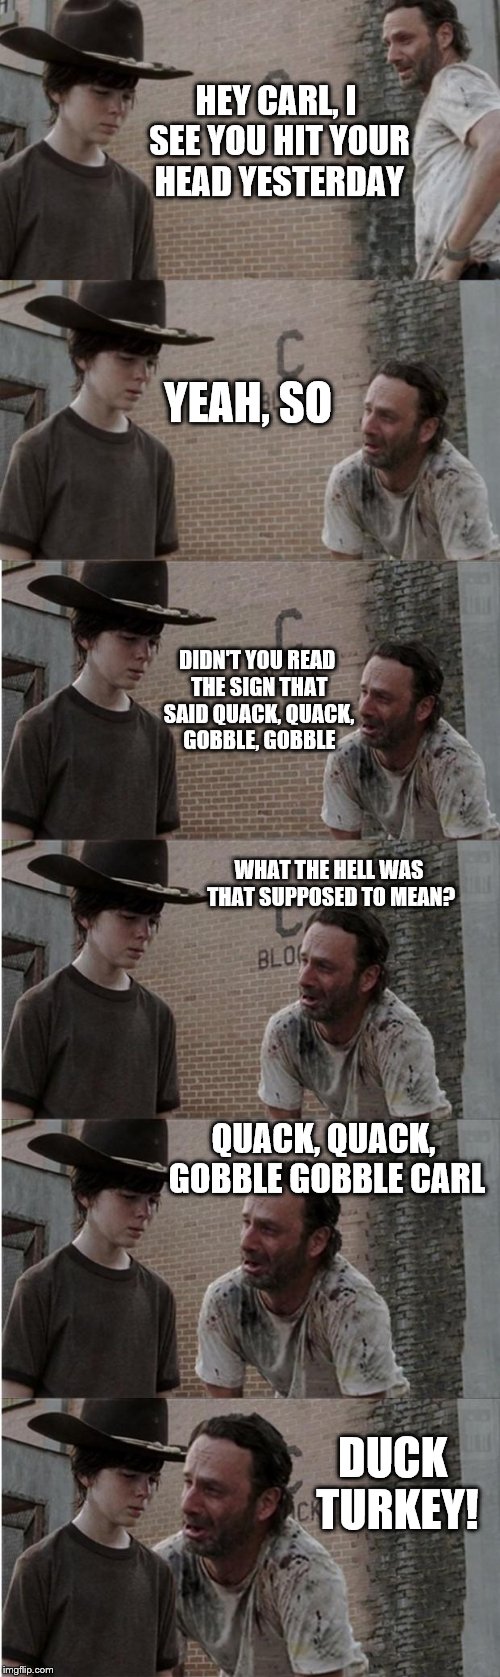 Rick and Carl Longer | HEY CARL, I SEE YOU HIT YOUR HEAD YESTERDAY; YEAH, SO; DIDN'T YOU READ THE SIGN THAT SAID QUACK, QUACK, GOBBLE, GOBBLE; WHAT THE HELL WAS THAT SUPPOSED TO MEAN? QUACK, QUACK, GOBBLE GOBBLE CARL; DUCK TURKEY! | image tagged in memes,rick and carl longer | made w/ Imgflip meme maker